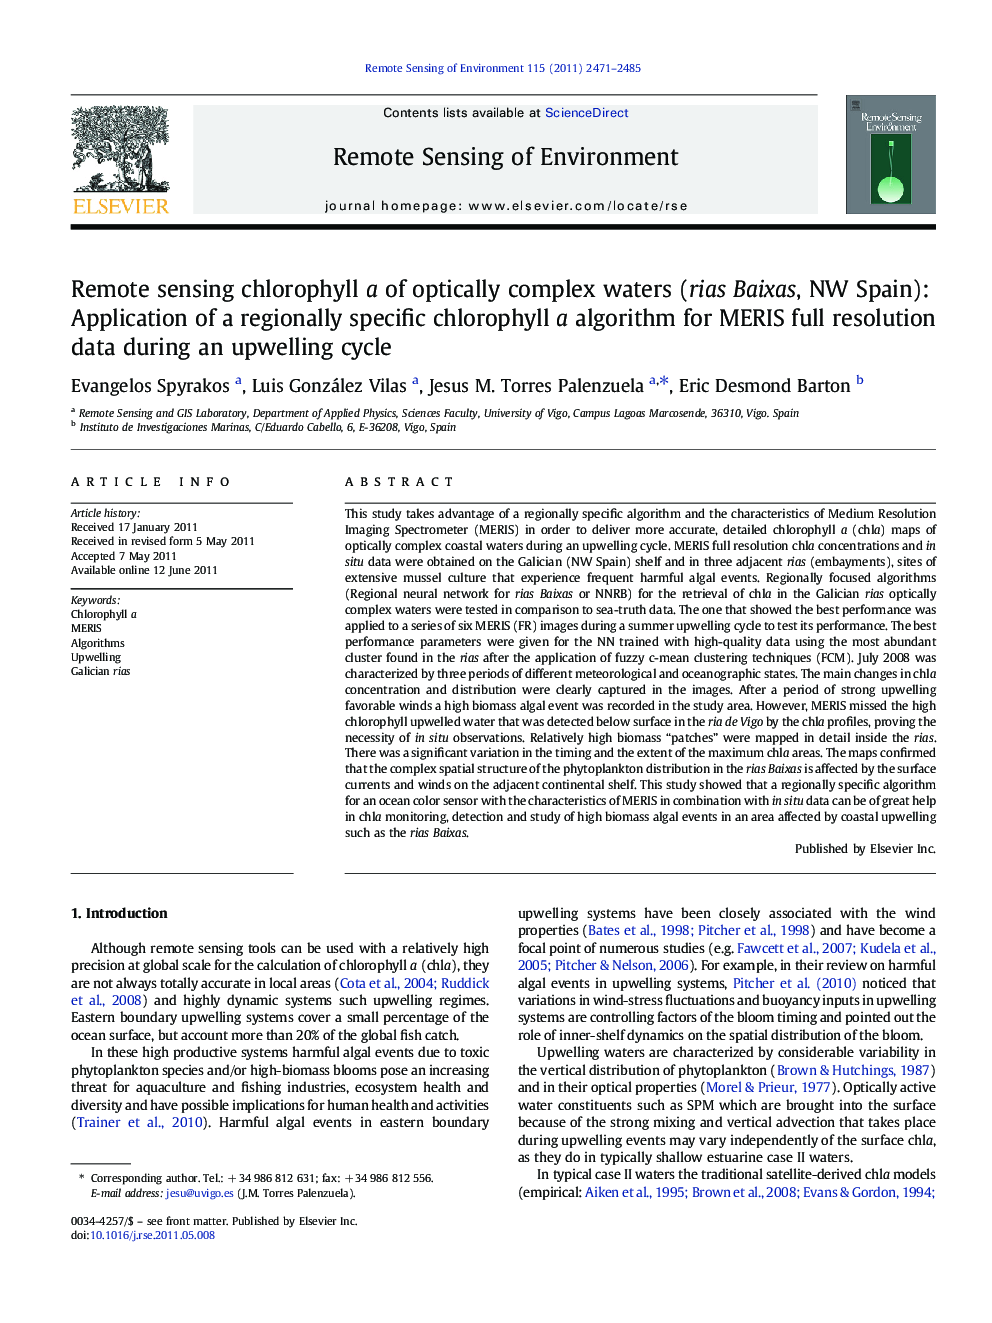 Remote sensing chlorophyll a of optically complex waters (rias Baixas, NW Spain): Application of a regionally specific chlorophyll a algorithm for MERIS full resolution data during an upwelling cycle